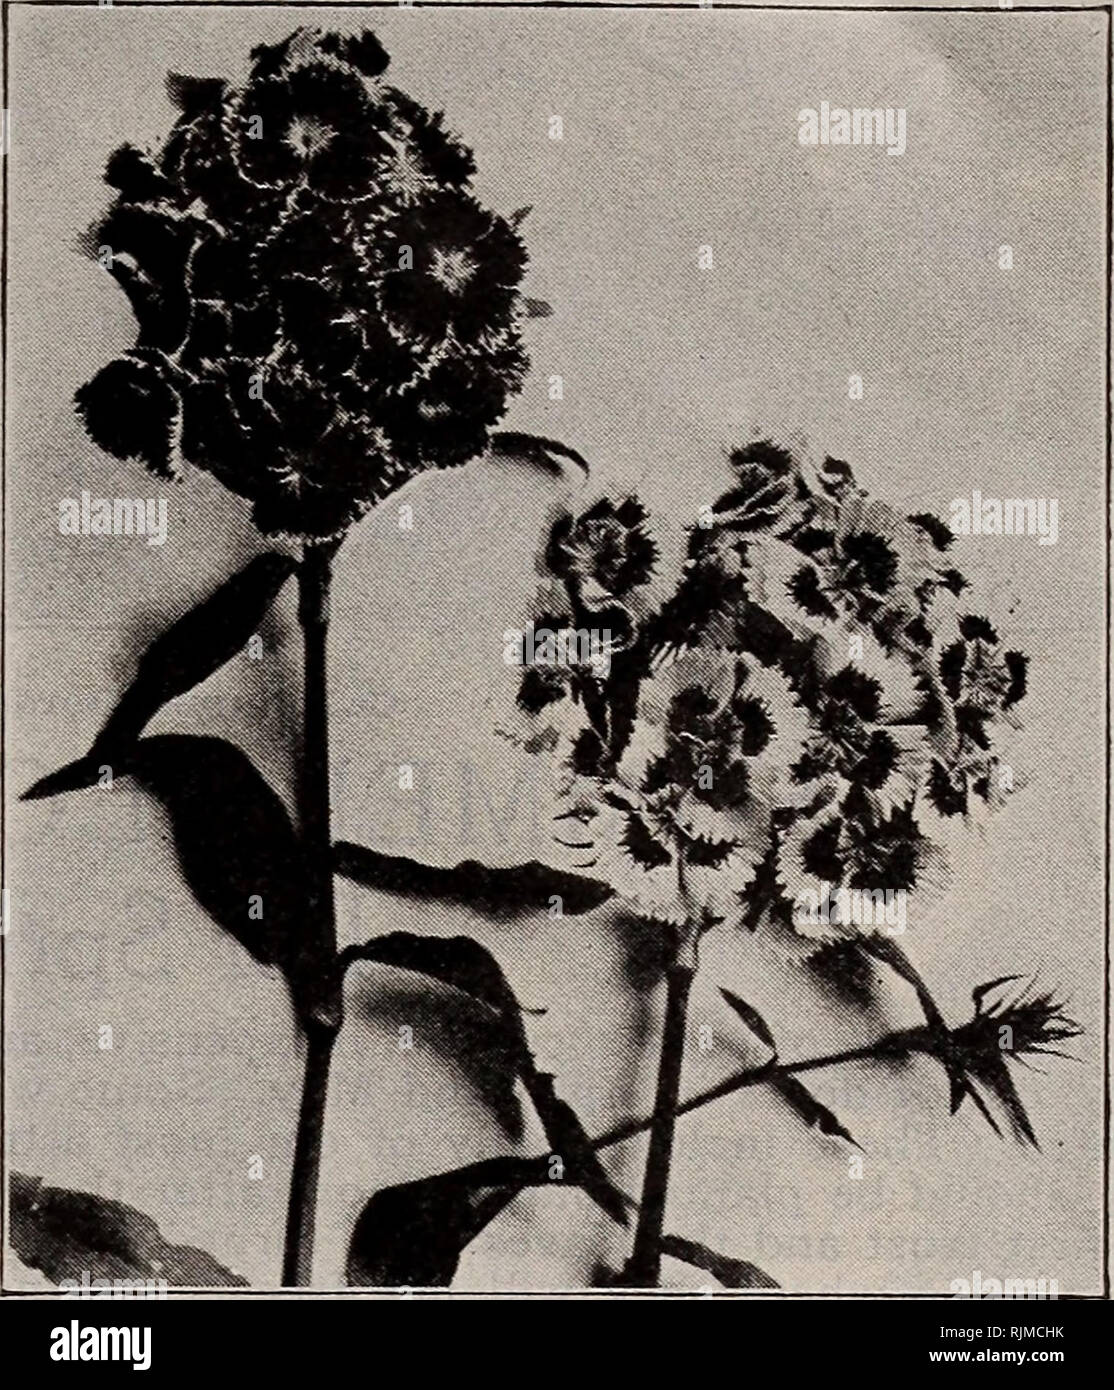 . Barnard's seeds bulbs. Seeds Catalogs; Vegetables Seeds Catalogs; Flowers Seeds Catalogs; Fruit Seeds Catalogs; Nurseries (Horticulture) Catalogs. The W. W. Barnard Co., 231-235 W. Madison St., Chicago 39 Physostegia—(False Dragon Head) One of the most beautiful of our mid-summer flowering perennials, forming dense bushes three to four feet high, bearing spikes of delicate tubular flowers not unlike a gigantic heather. Virginlca—Bright but soft pink. Each, 25c; doz., $2.50 Vlrginica Alba—Pure white. Each, 25c; doz., $2.50 Pinks—(Hardy Garden) Dlanthus Flumarius—(Hardy Garden or Pheasant Eye  Stock Photo